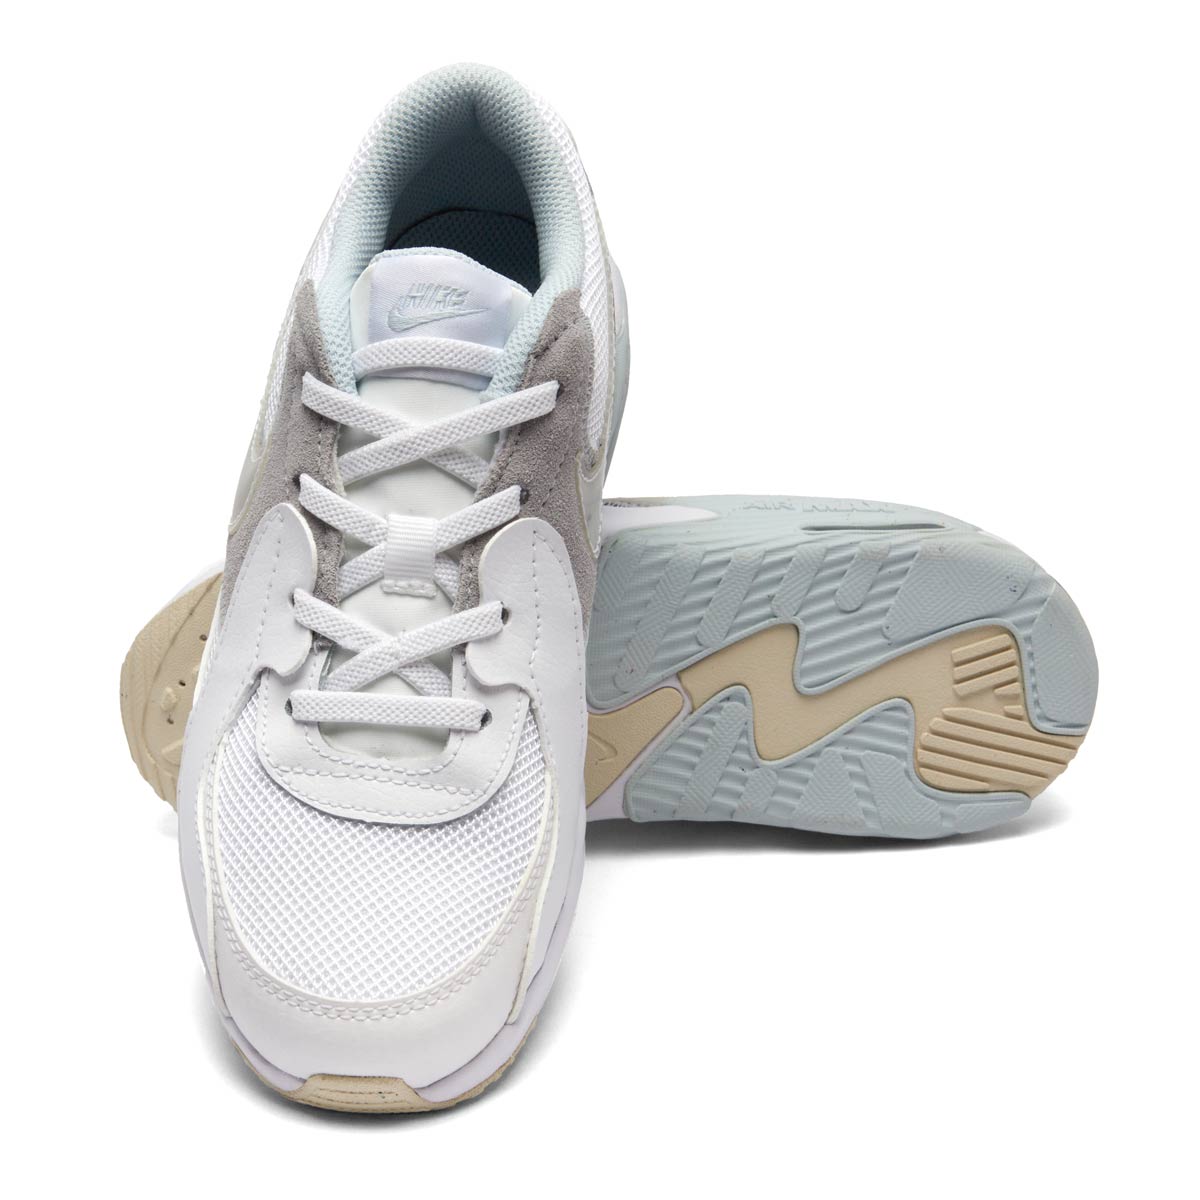 PS PROOZY Sneaker Excee – Max Air Youth Nike